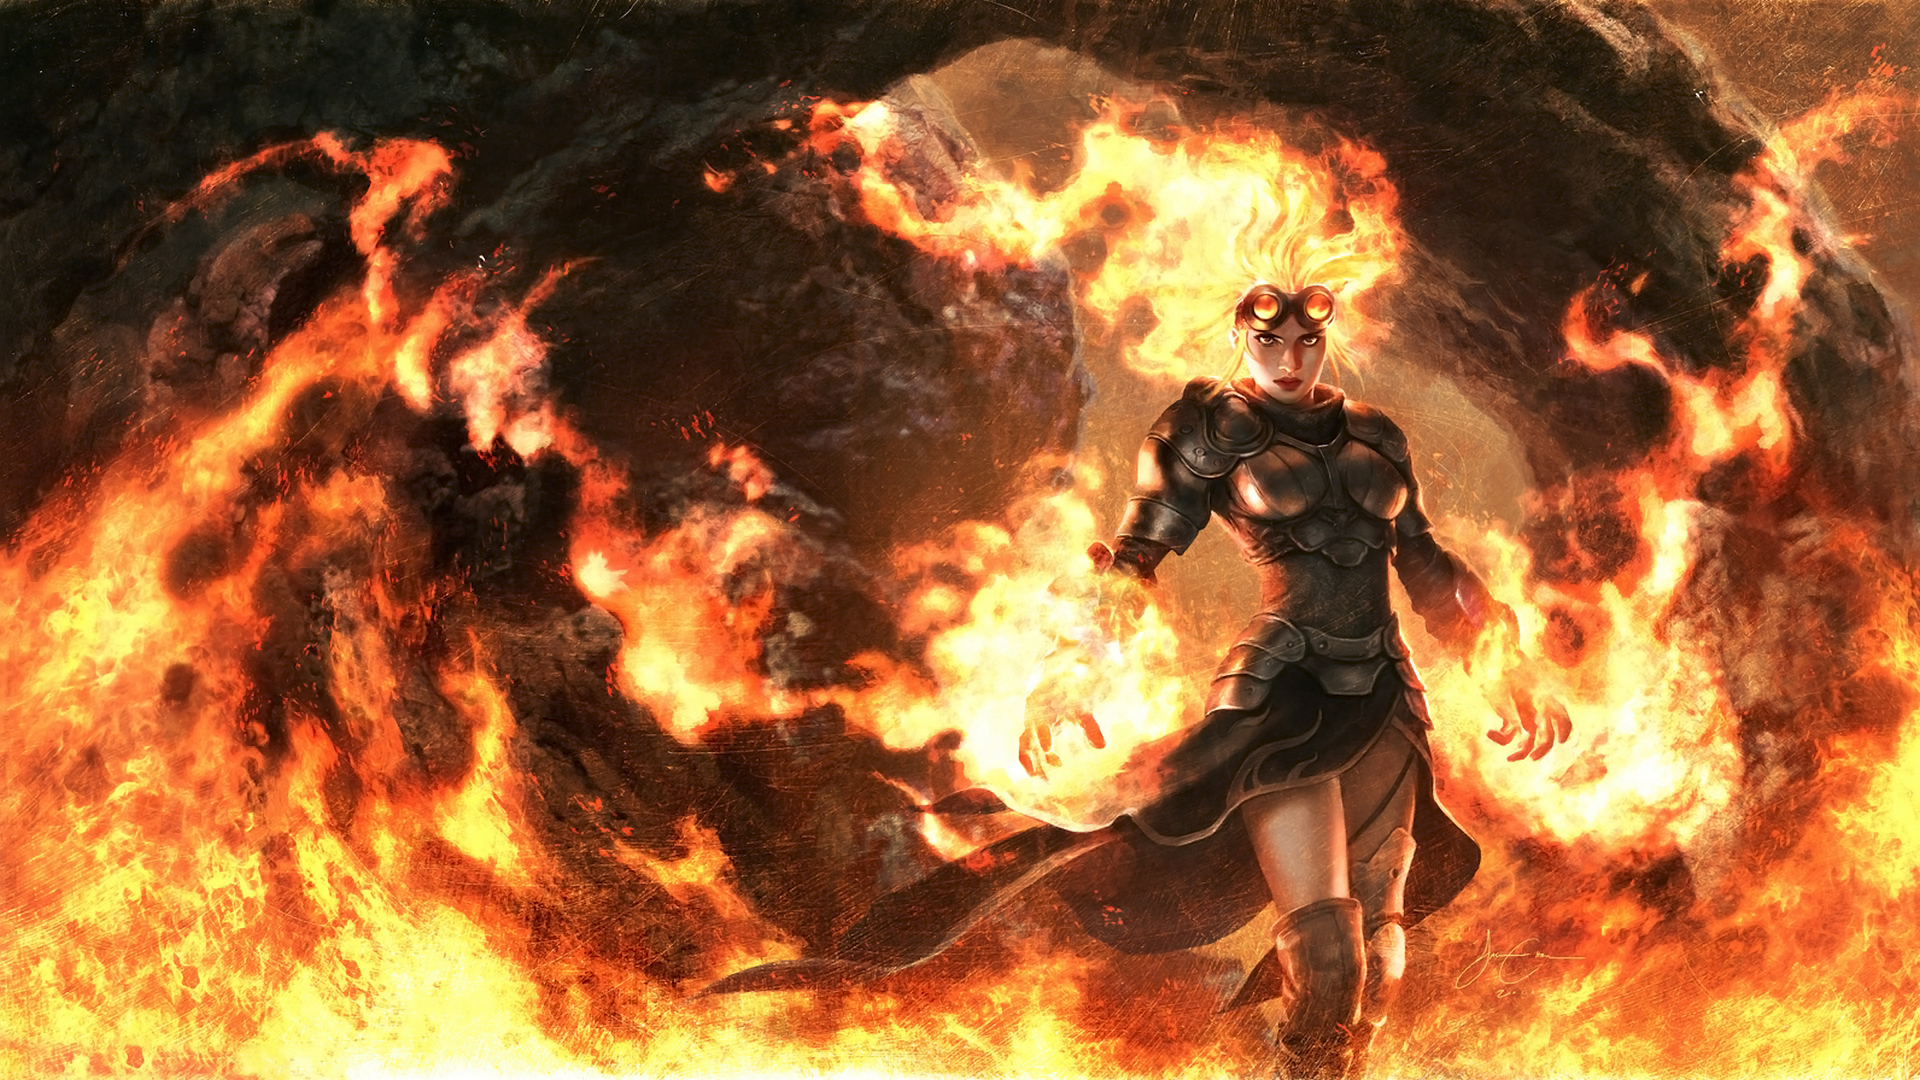    Magic The Gathering Fire Woman Armor Skirt Goggles Flame Wallpaper